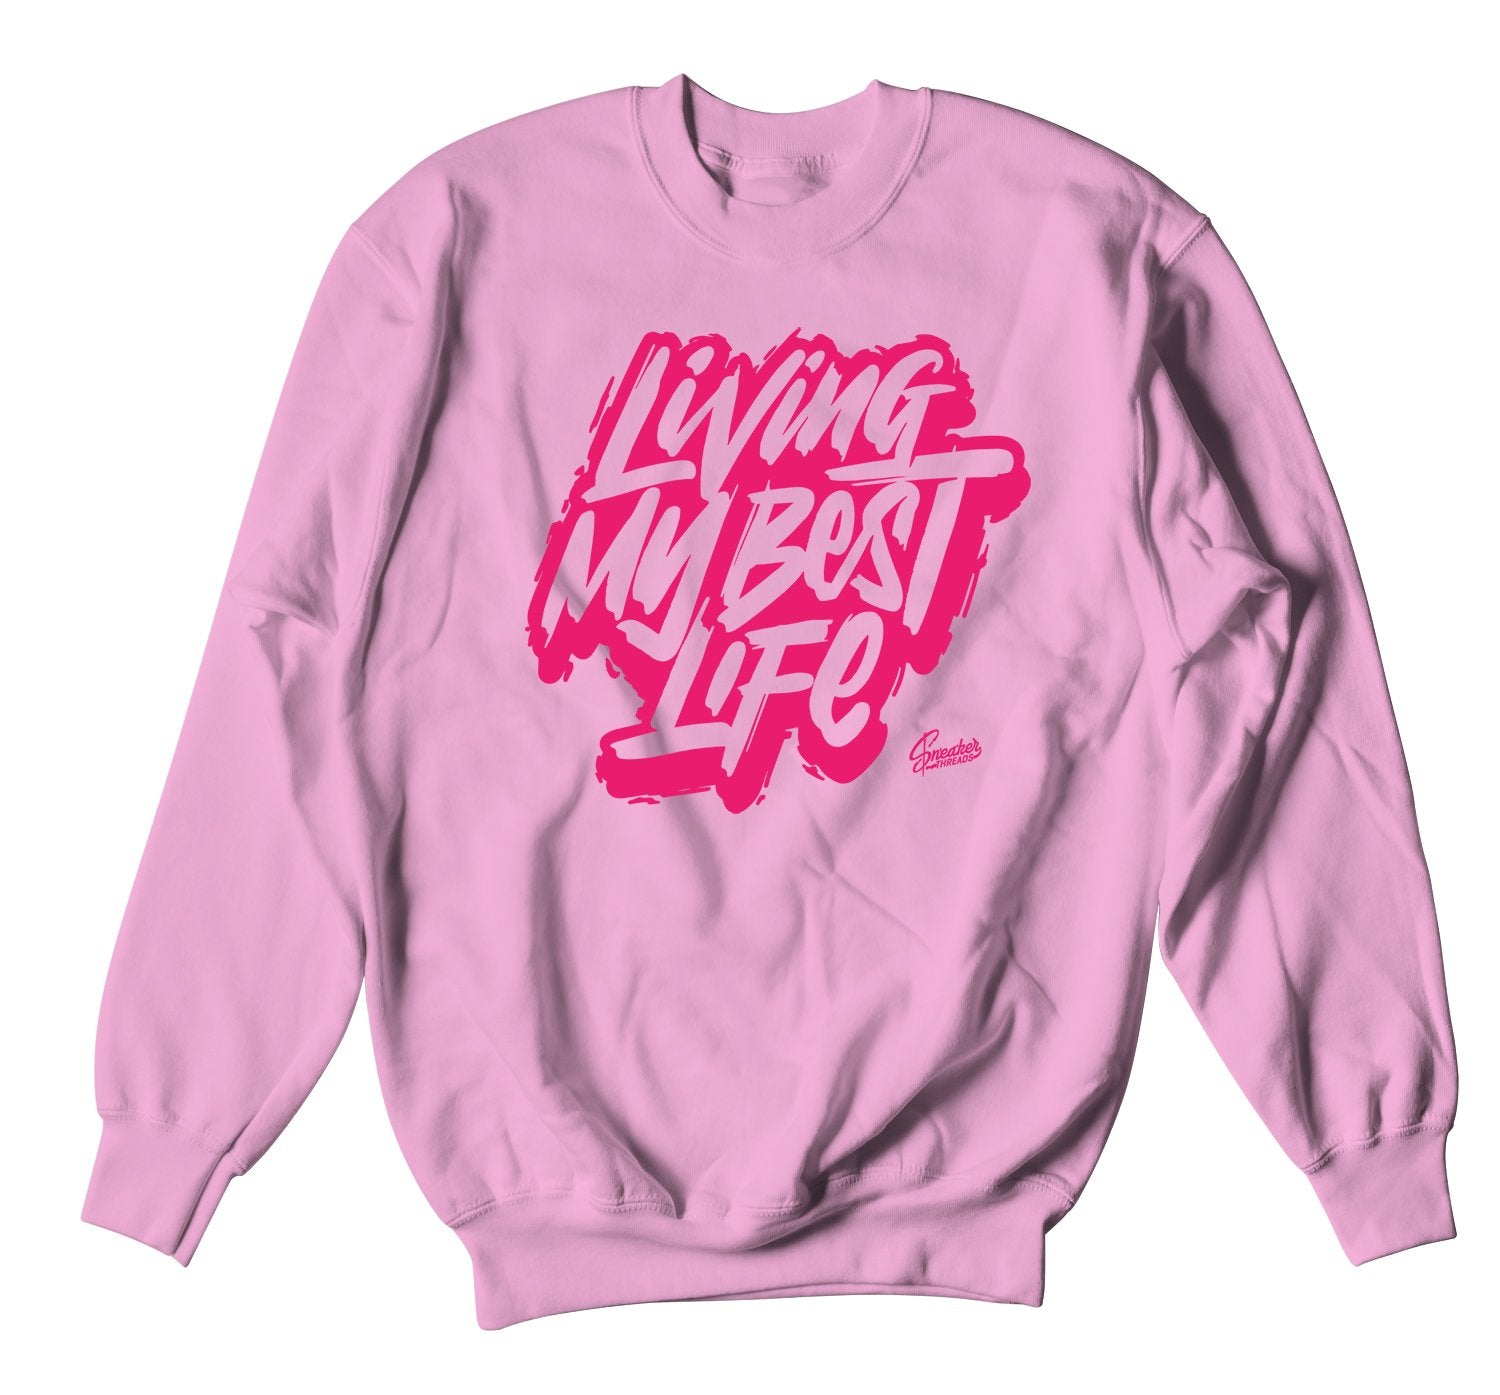 sweatshirt collection matching the kd aunt pearl 12 sneakers